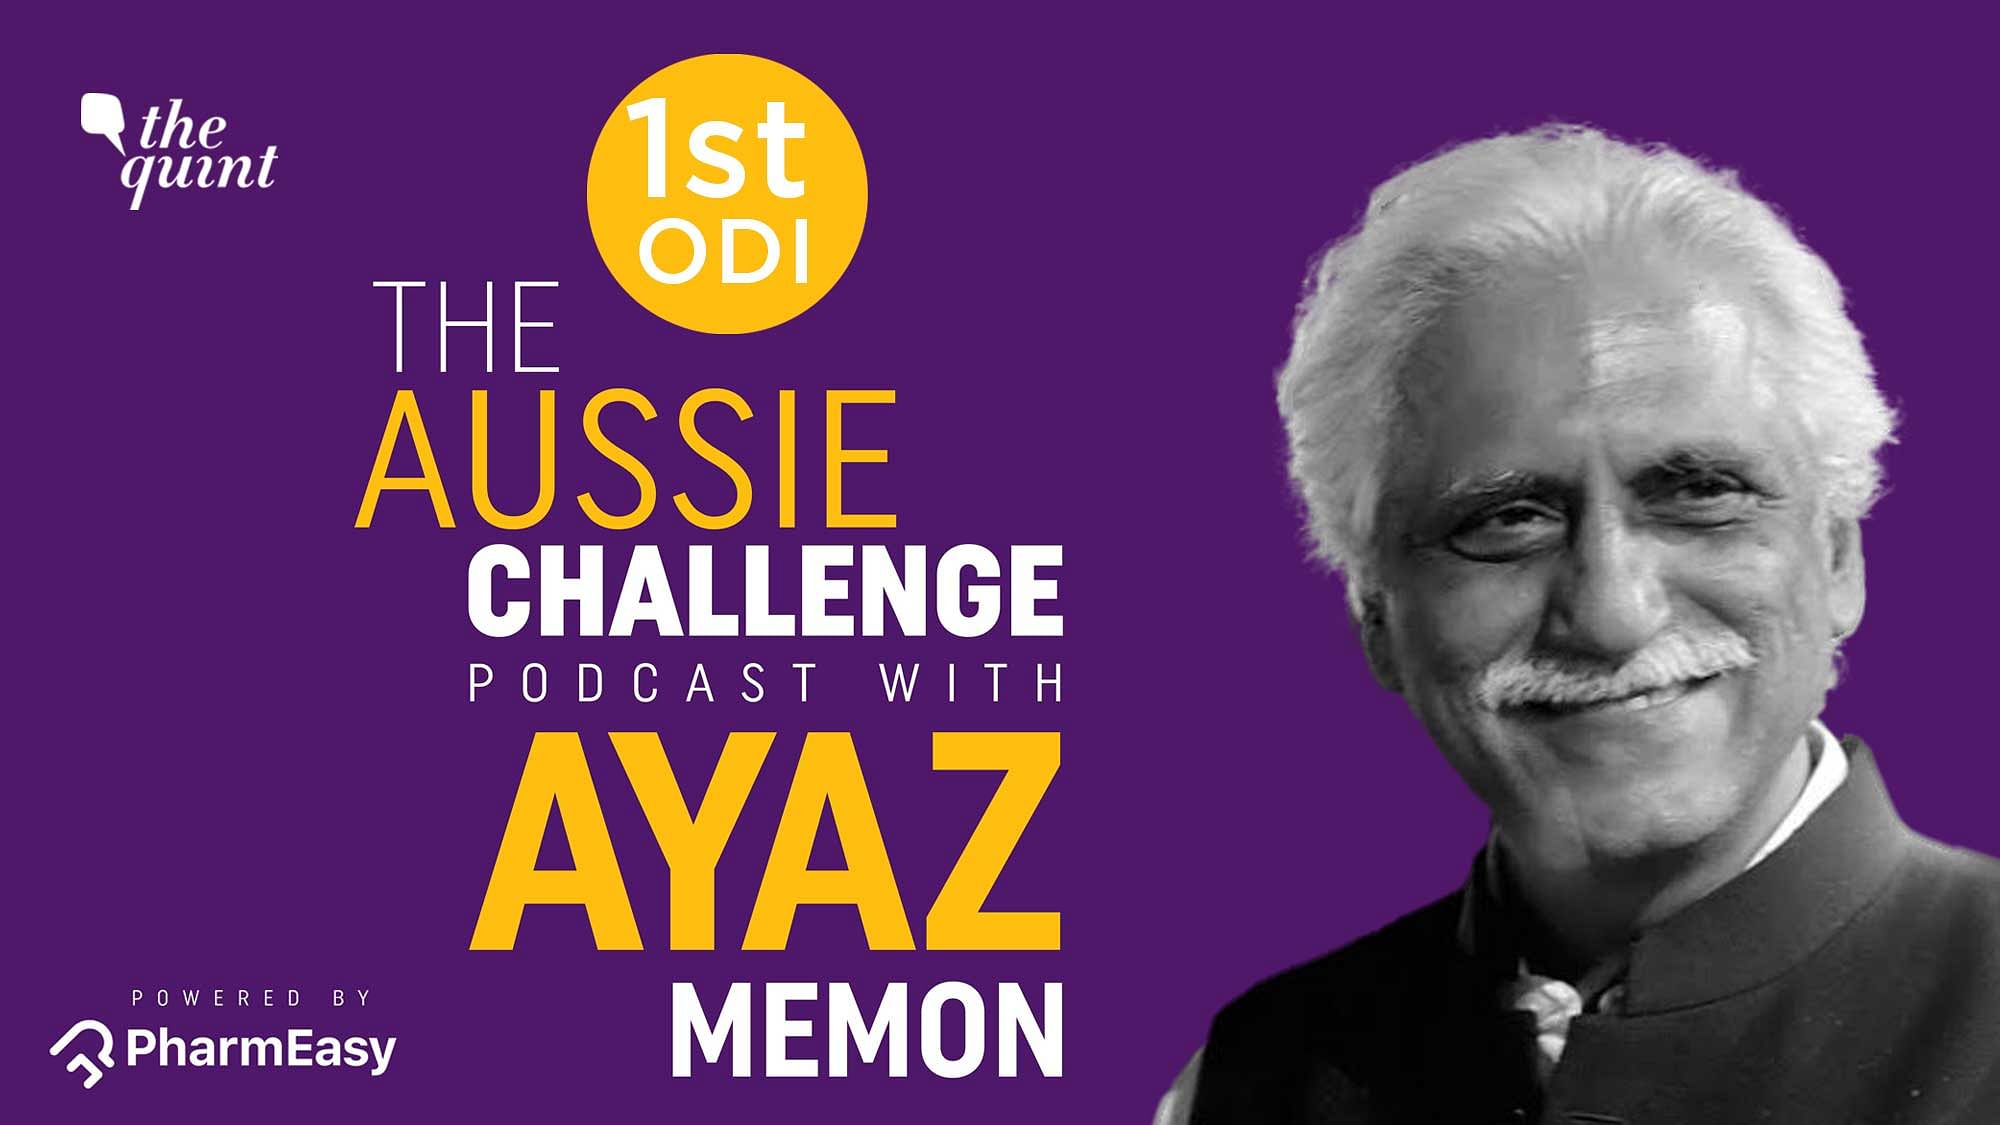 Episode 1 of The Aussie Challenge Podcast with Ayaz Memon after India lose to Australia by 66 runs in ODI series opener.